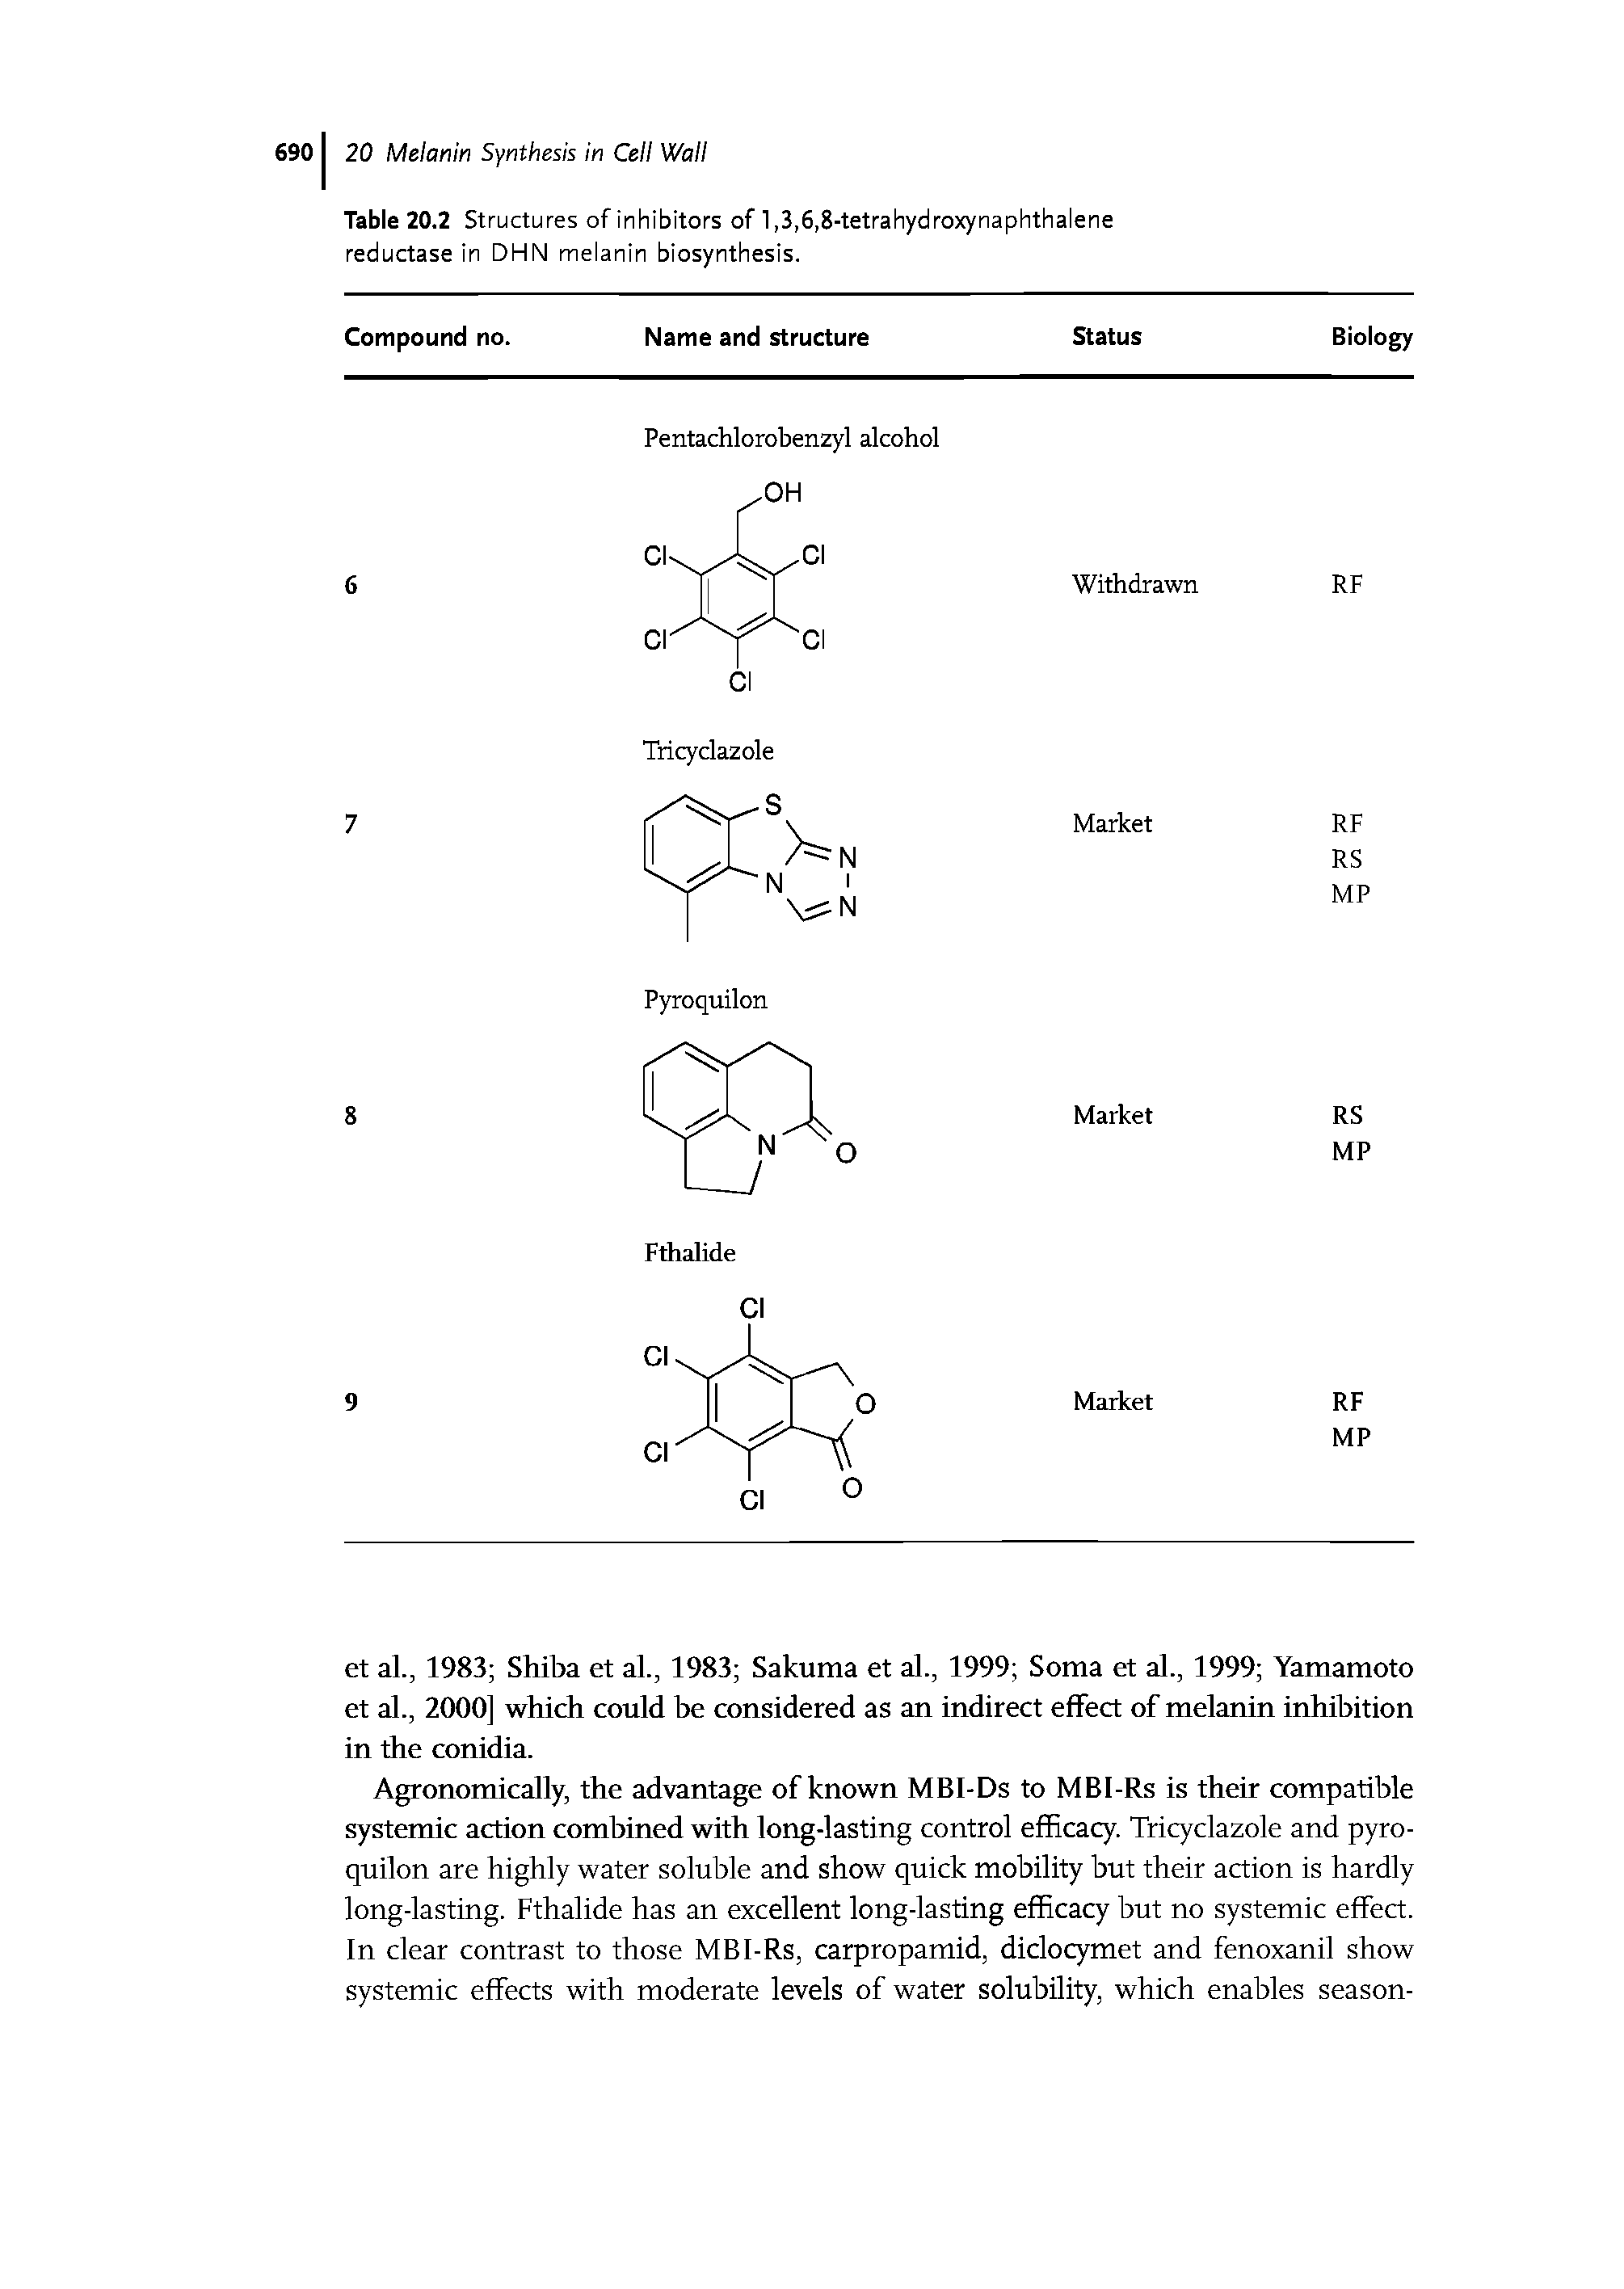 Table 20.2 Structures of inhibitors of 1,3,6,8-tetrahydroxynaphthalene reductase in DHN melanin biosynthesis.